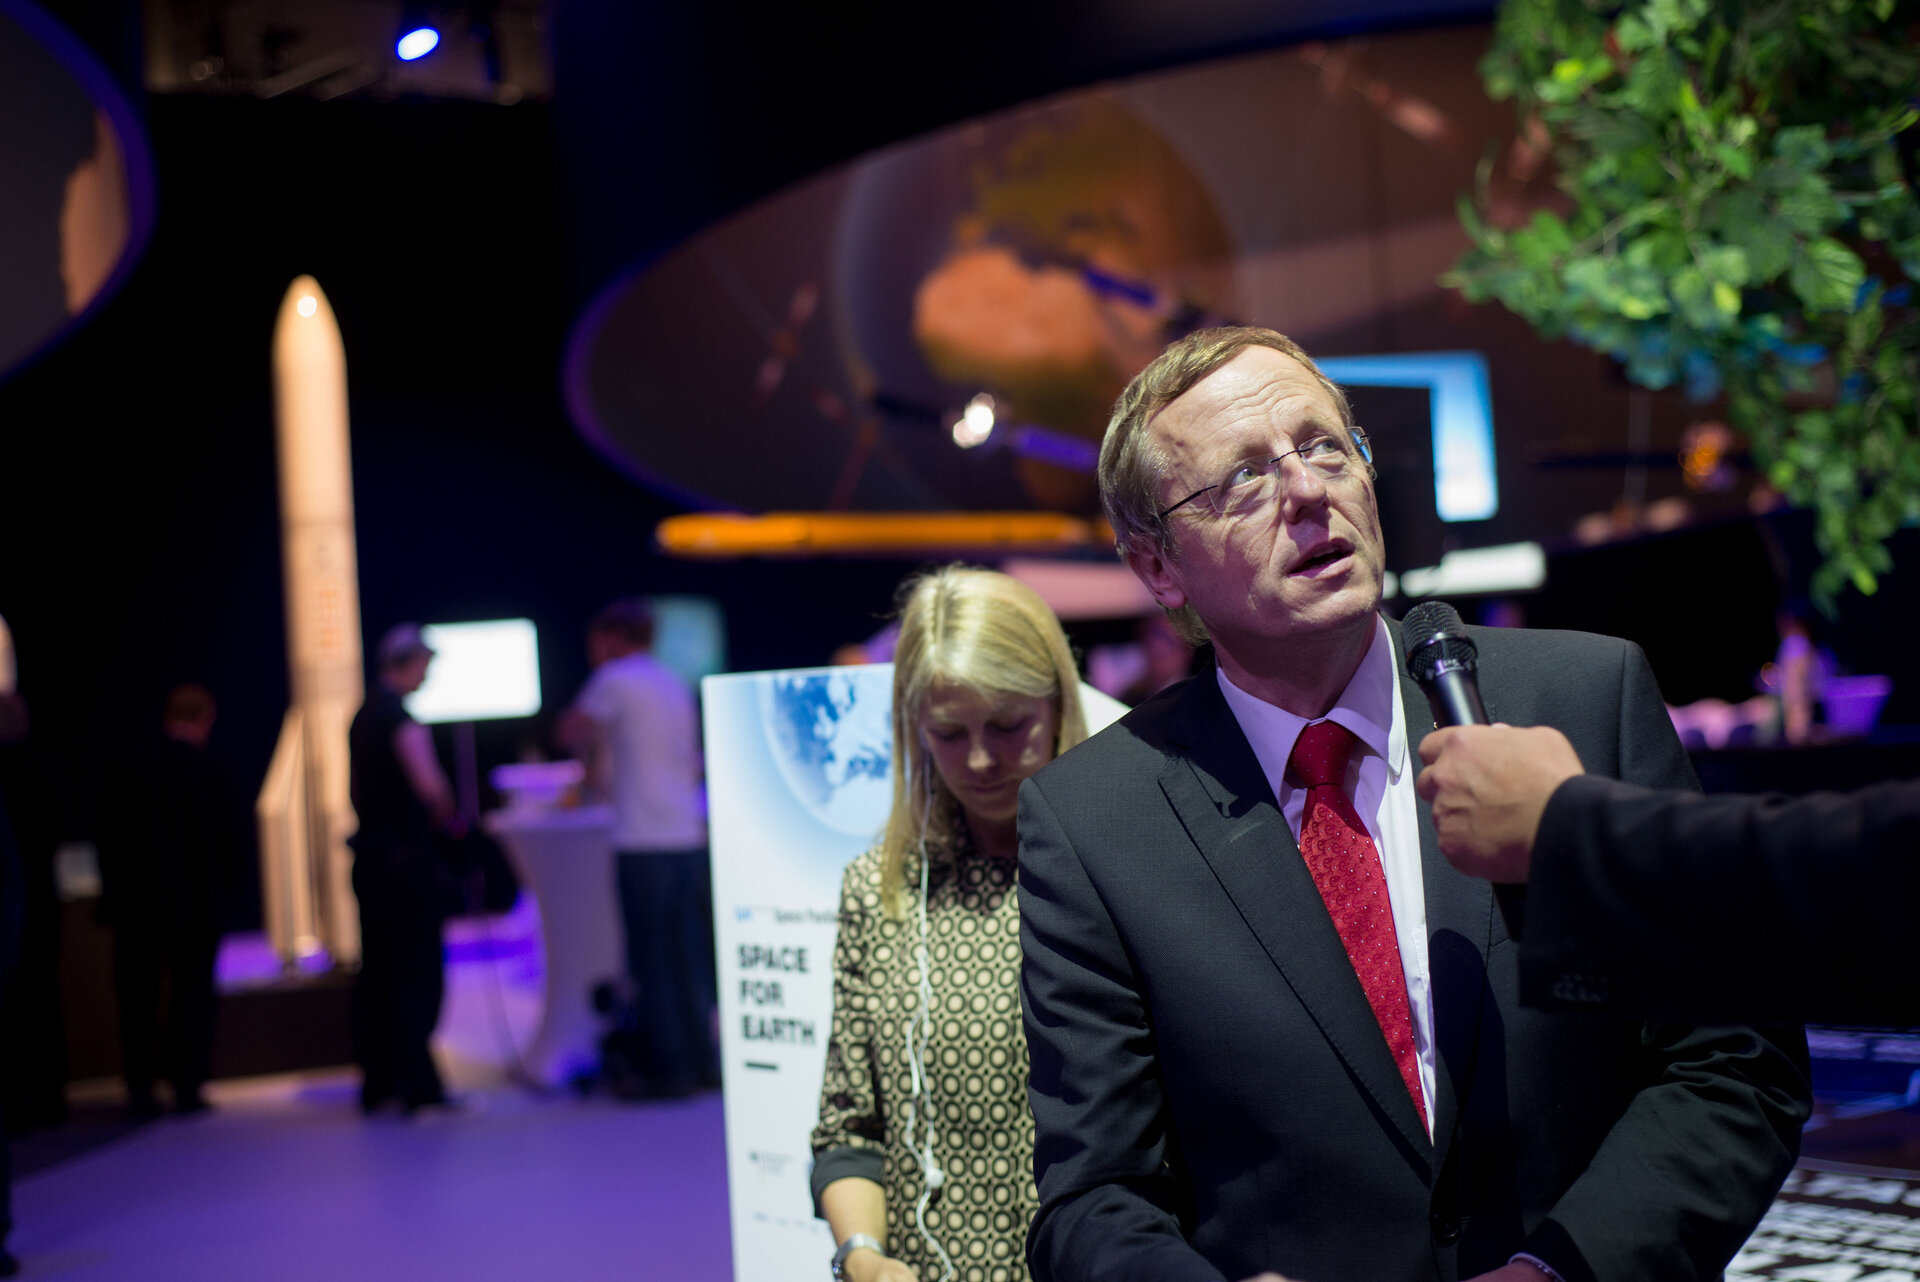 Jan Wörner at the ‘Space for Earth’ pavilion at ILA